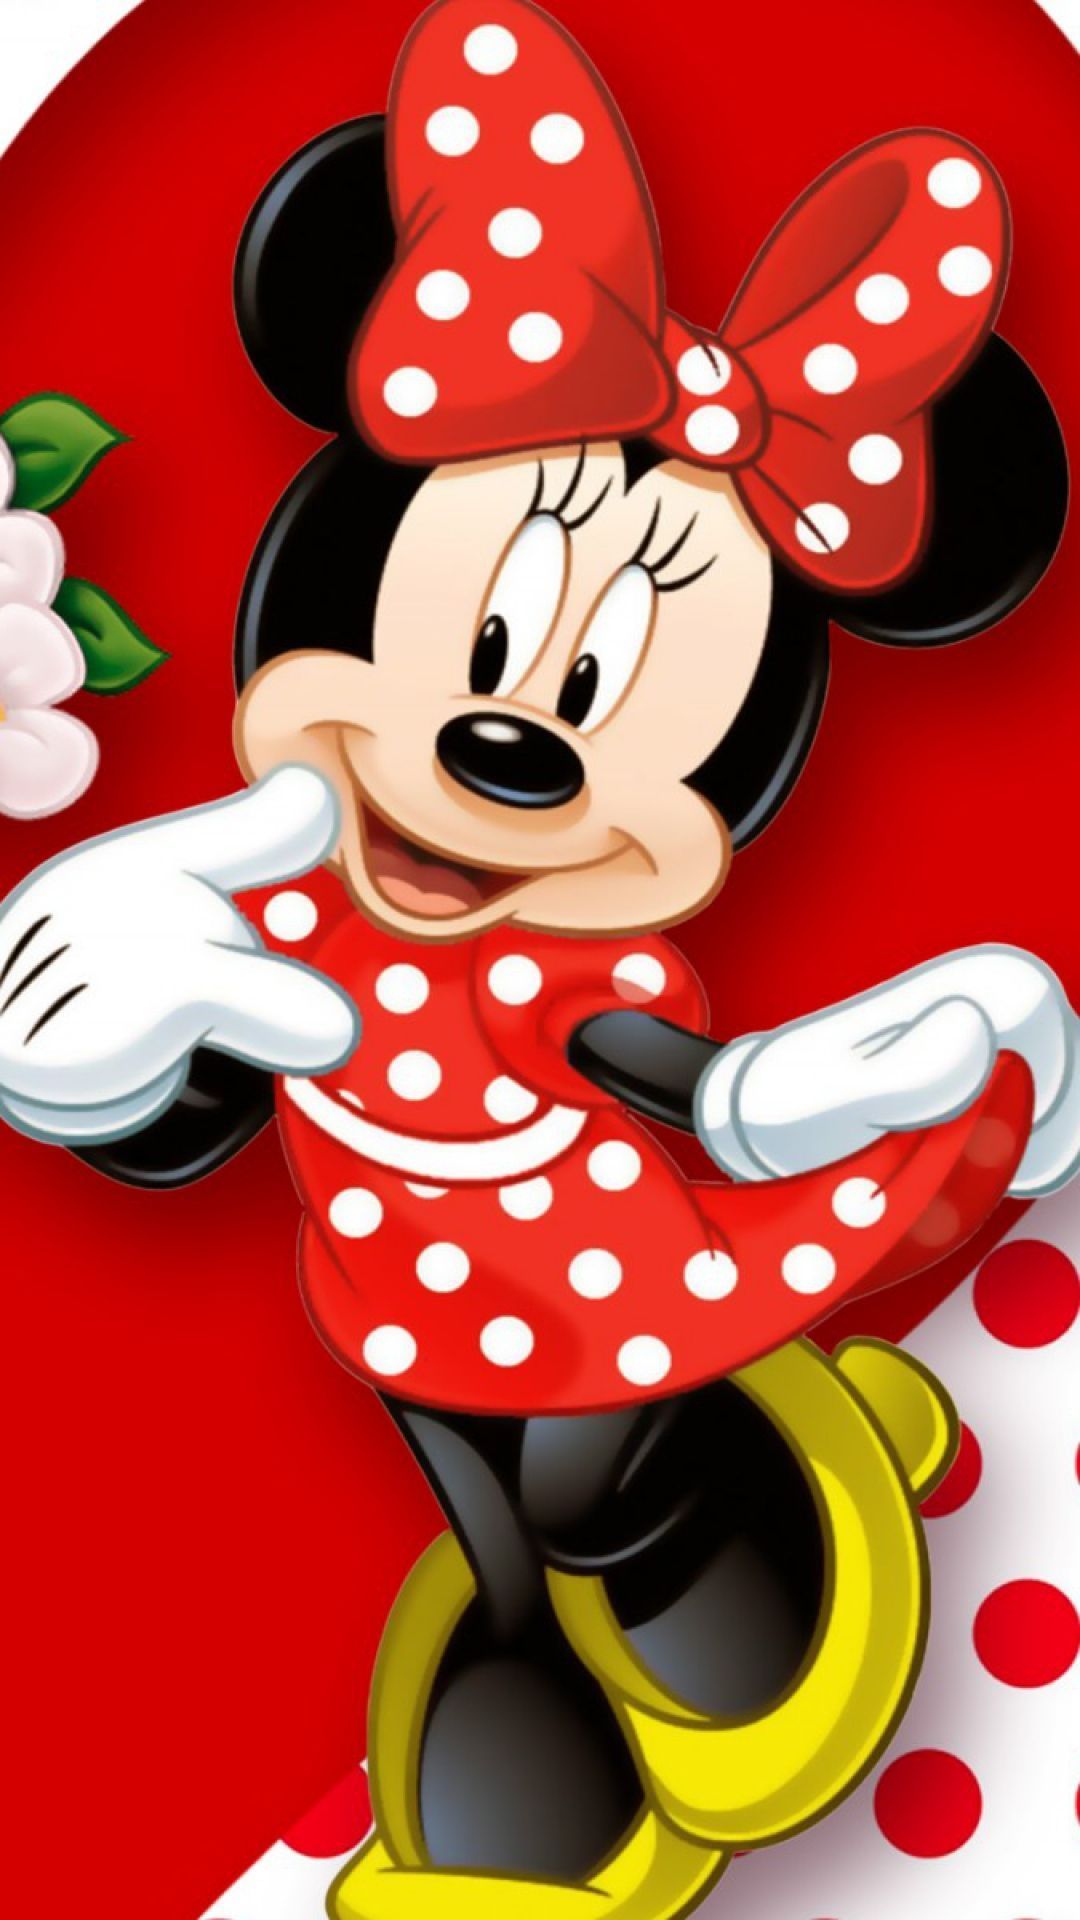 1080x1920 Mickey Mouse and Minnie in Love Wallpaper - Top Free Mickey Mouse on WallpaperBat